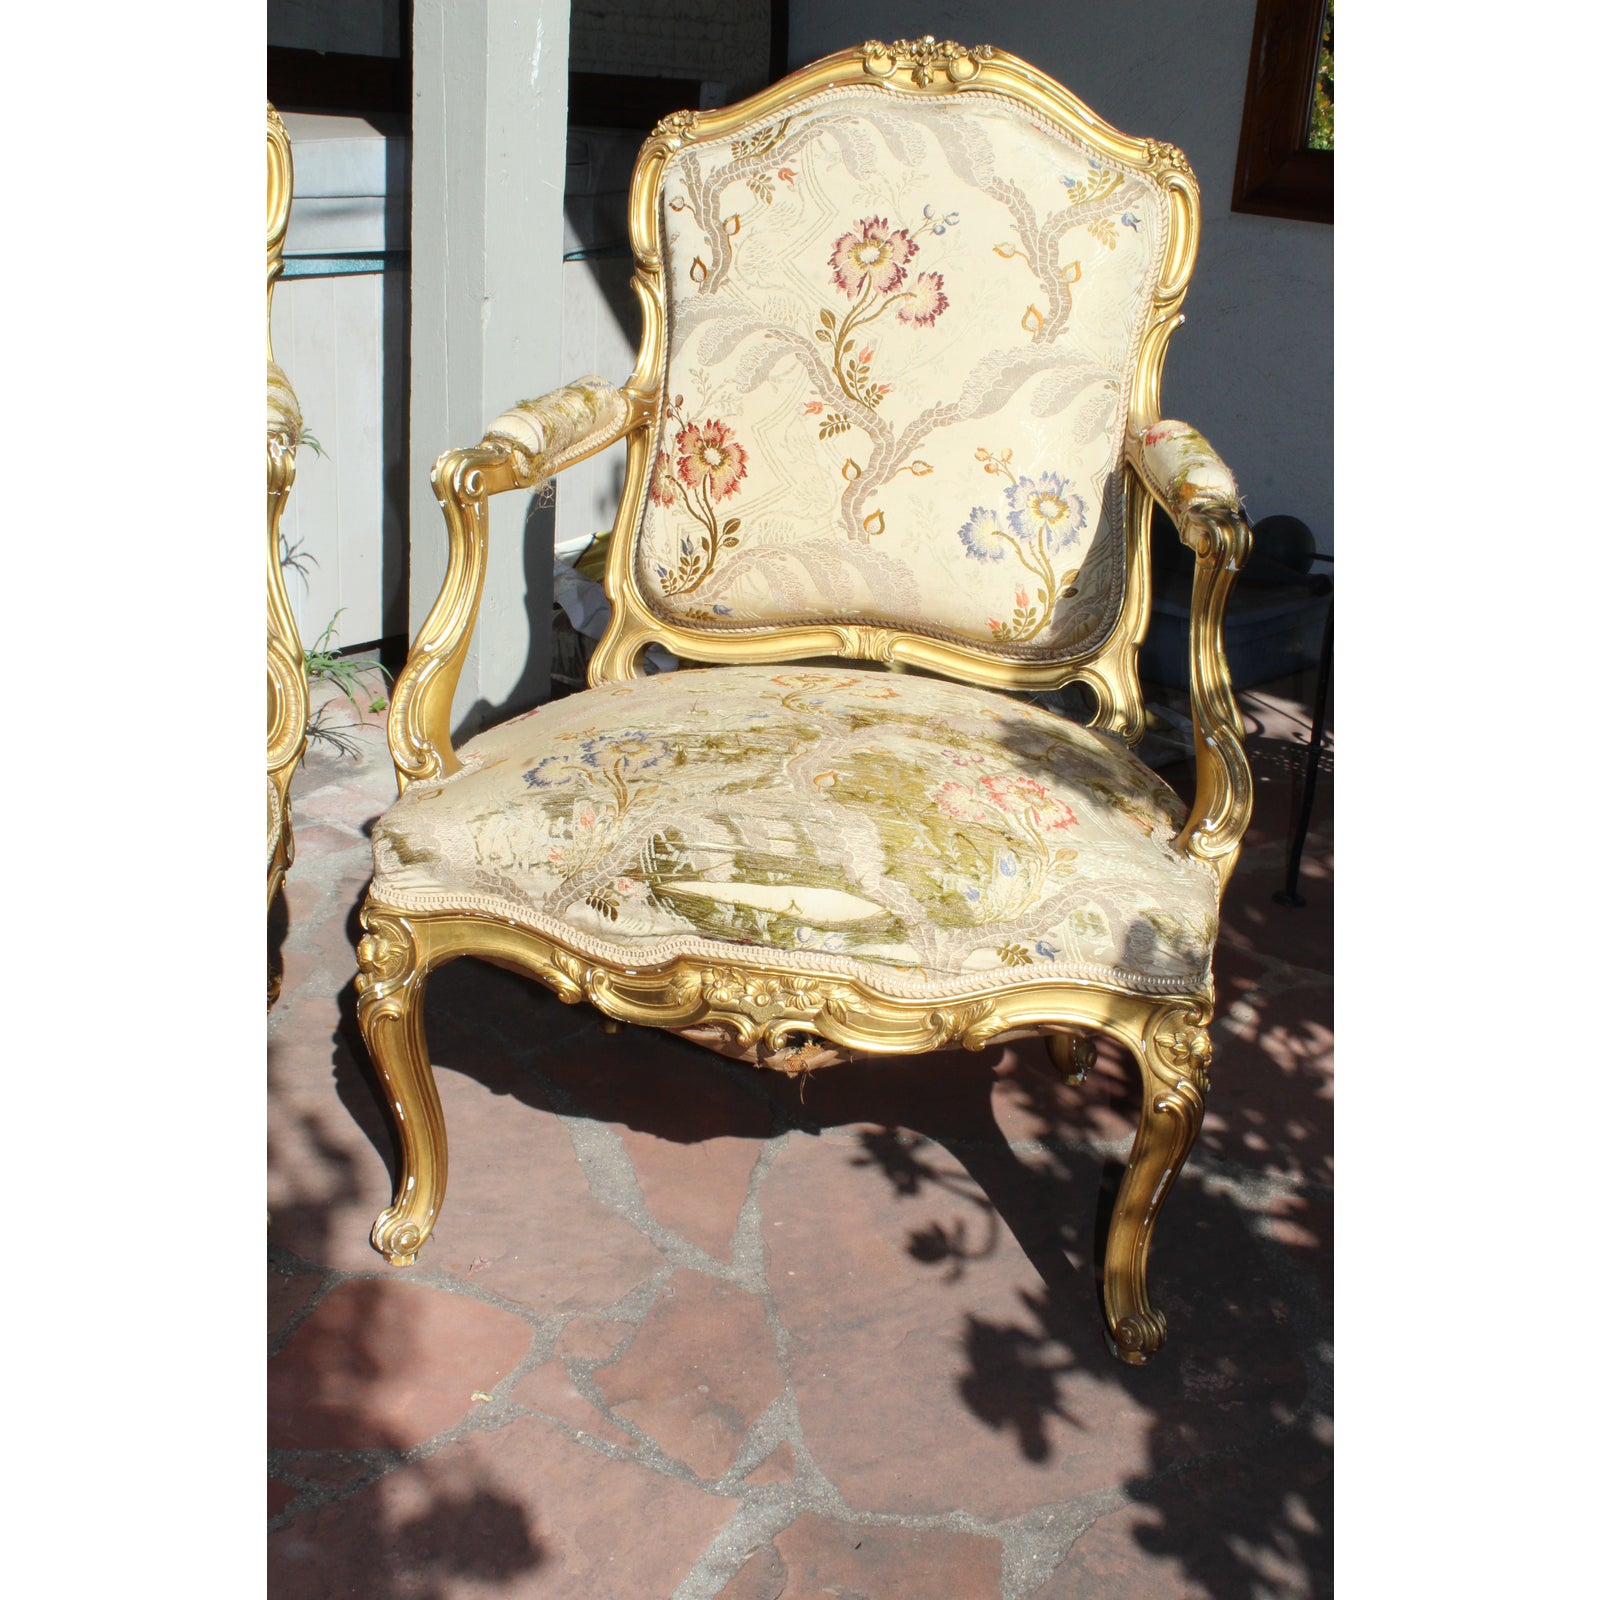 pr-of-maison-jansen-arm-chairs-signed-louis-xv-style-late-19c-8561